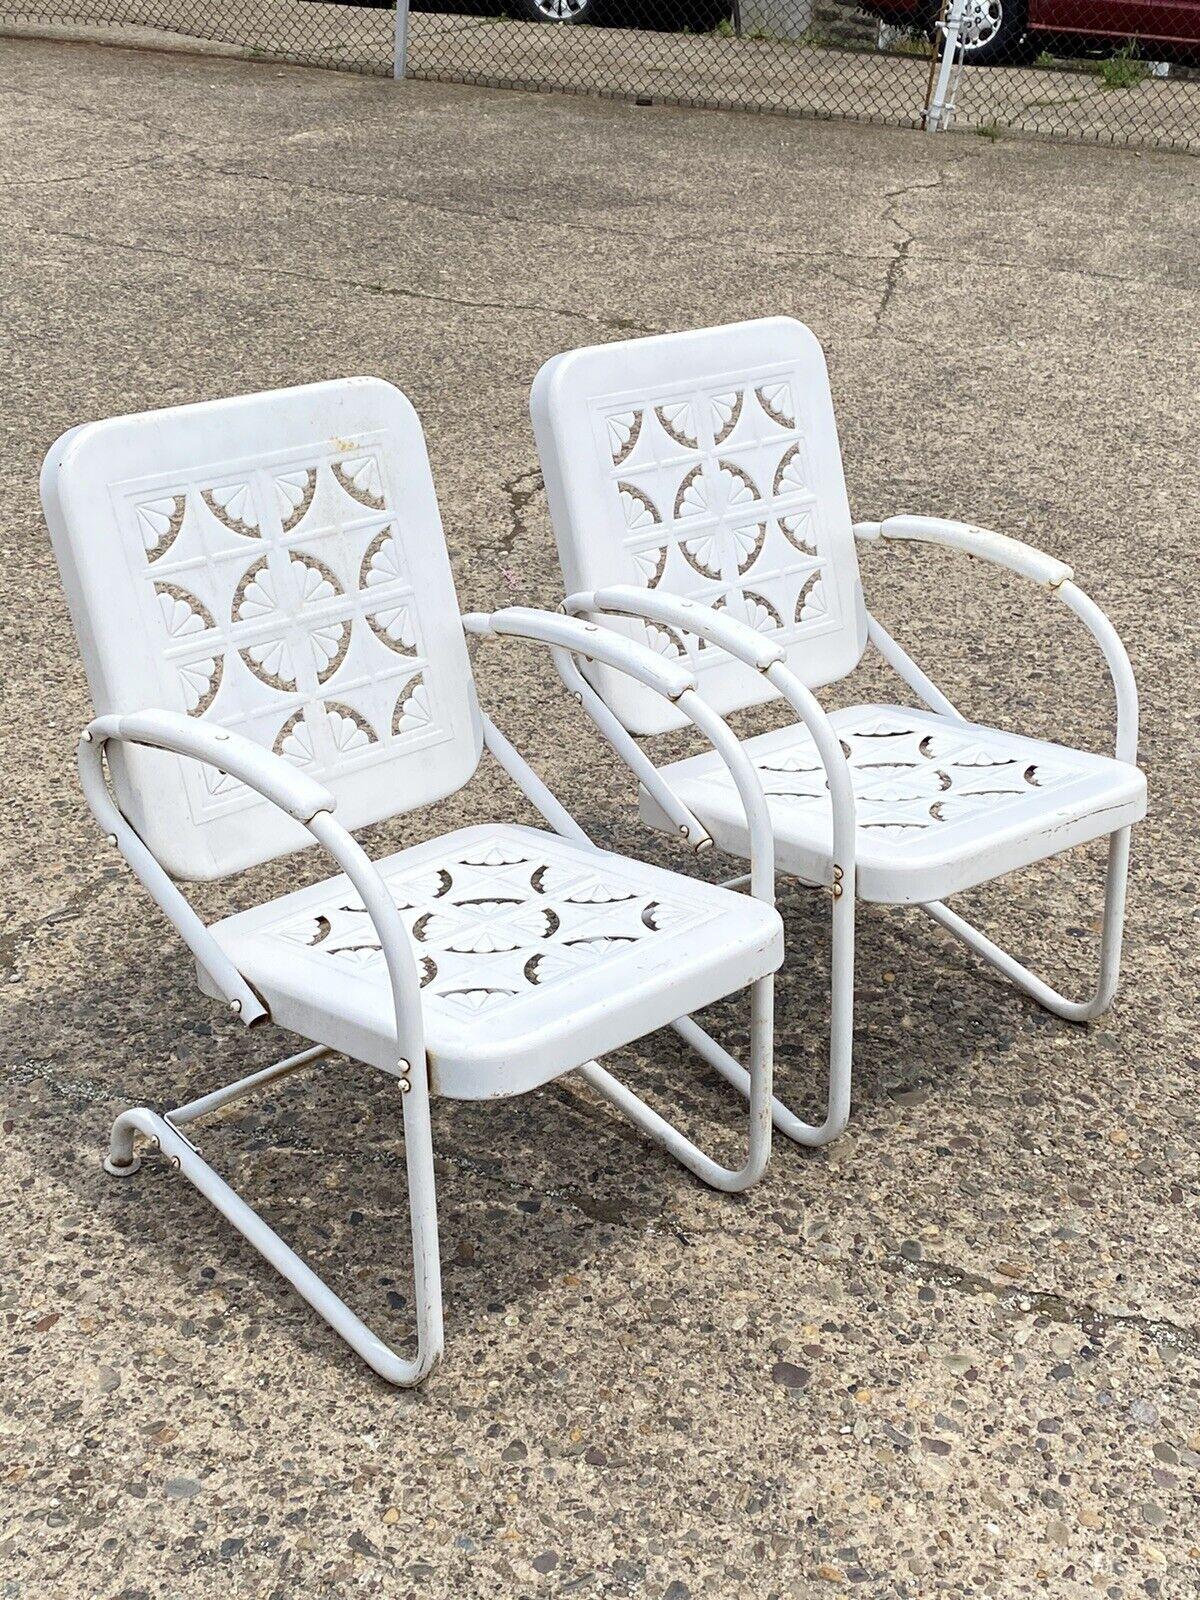 Vintage Starburst Pie Crest Metal Outdoor Patio Springer Lounge Chairs - a Pair For Sale 6